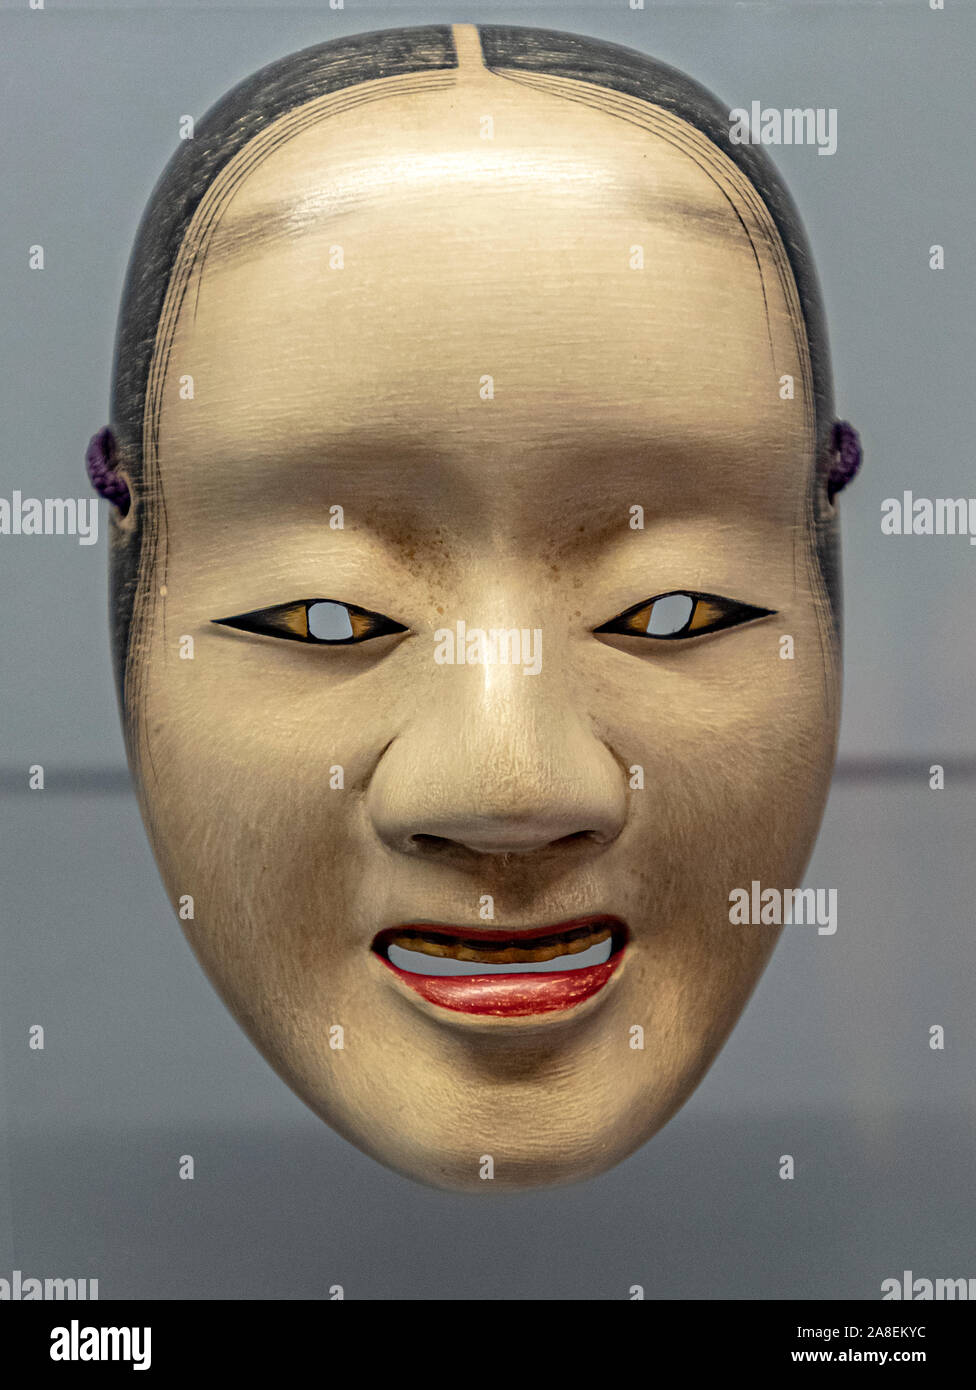 Italy Piedmont Turin Mao ( Museo D'arte Orientale ) Museum of Oriental art - Exibhition 'Female warrior from the Rising Sun' - Mask of Woman in the no Theatre - No Theatre Mask -Deigan - Nomura Ran - Painted wood - Showa Period ( 1926 - 1989 )  - Private Collection Stock Photo